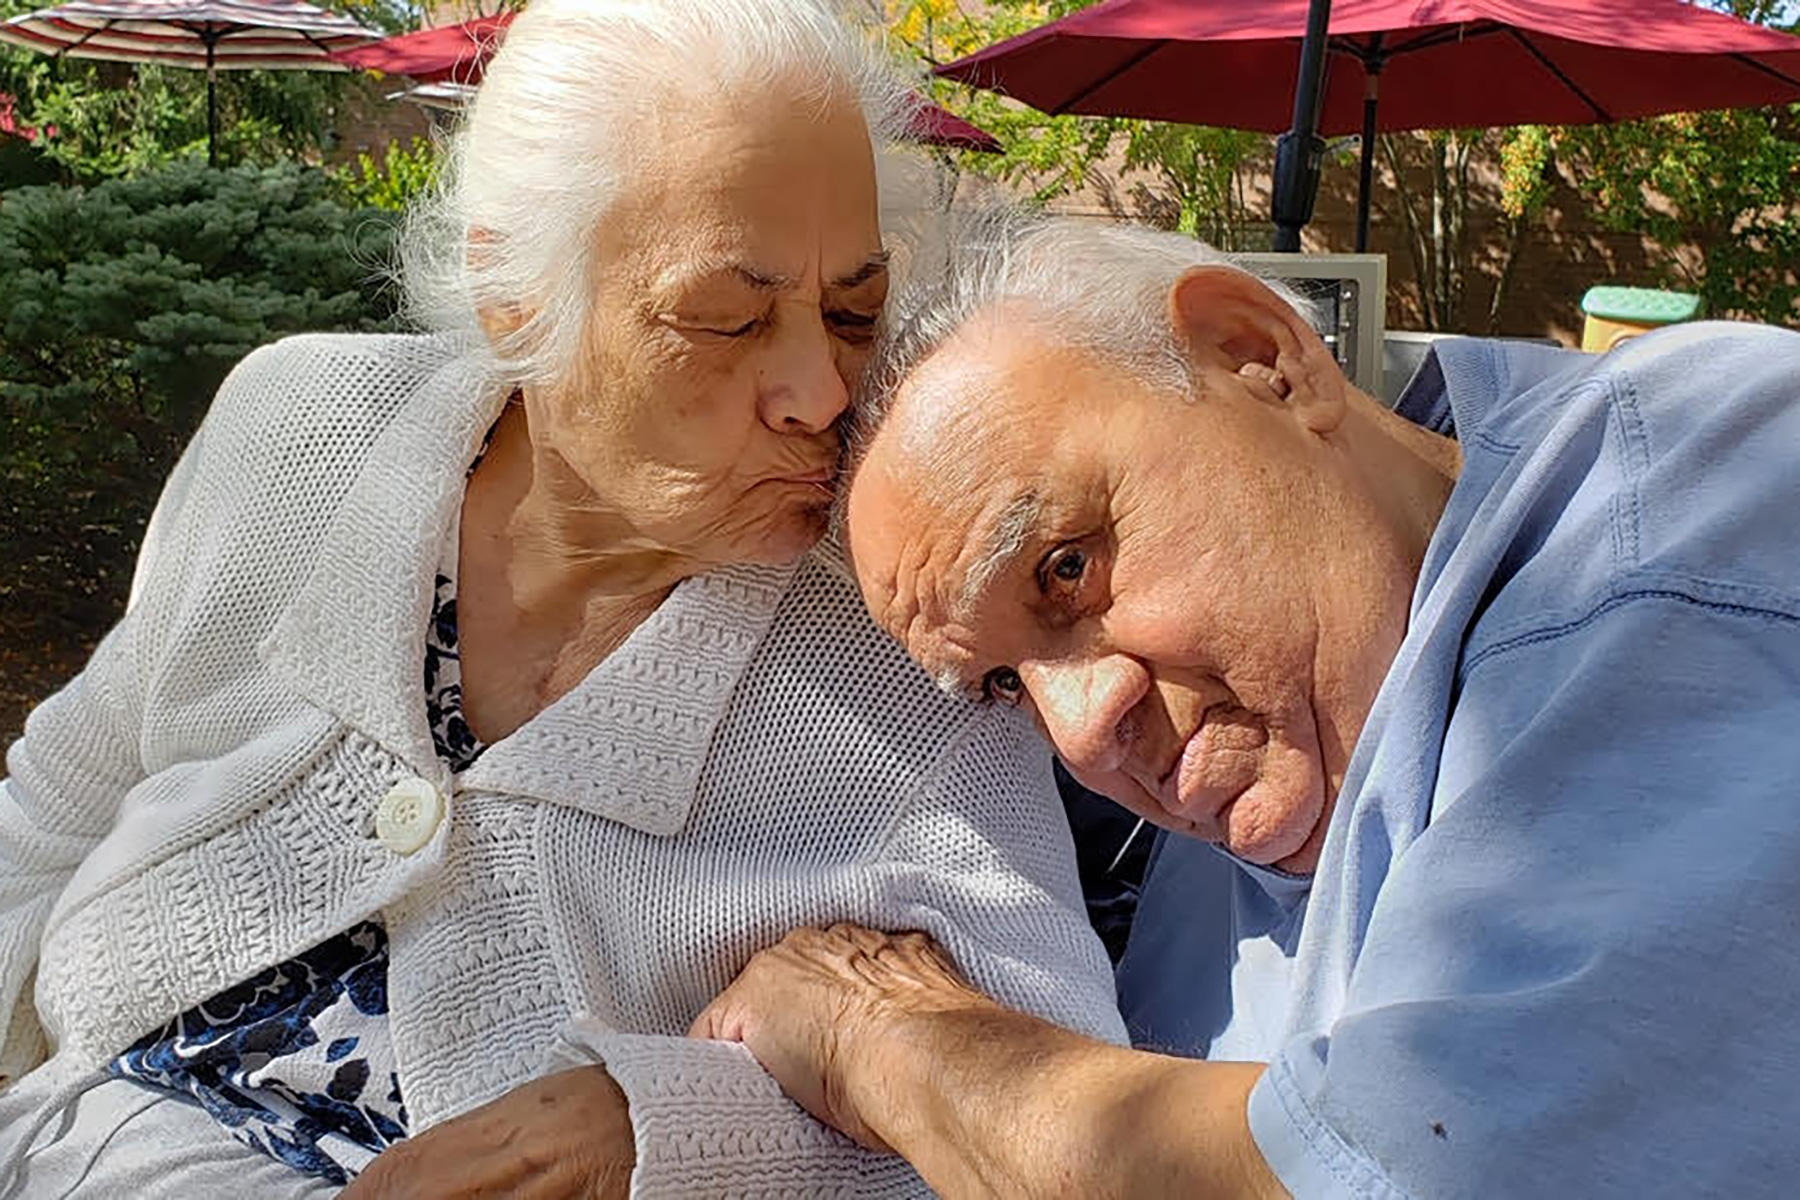 Julia Ramos' grandmother, Angelica Mendez, with her husband Pedro Mendez, on their 64th wedding anniversary.